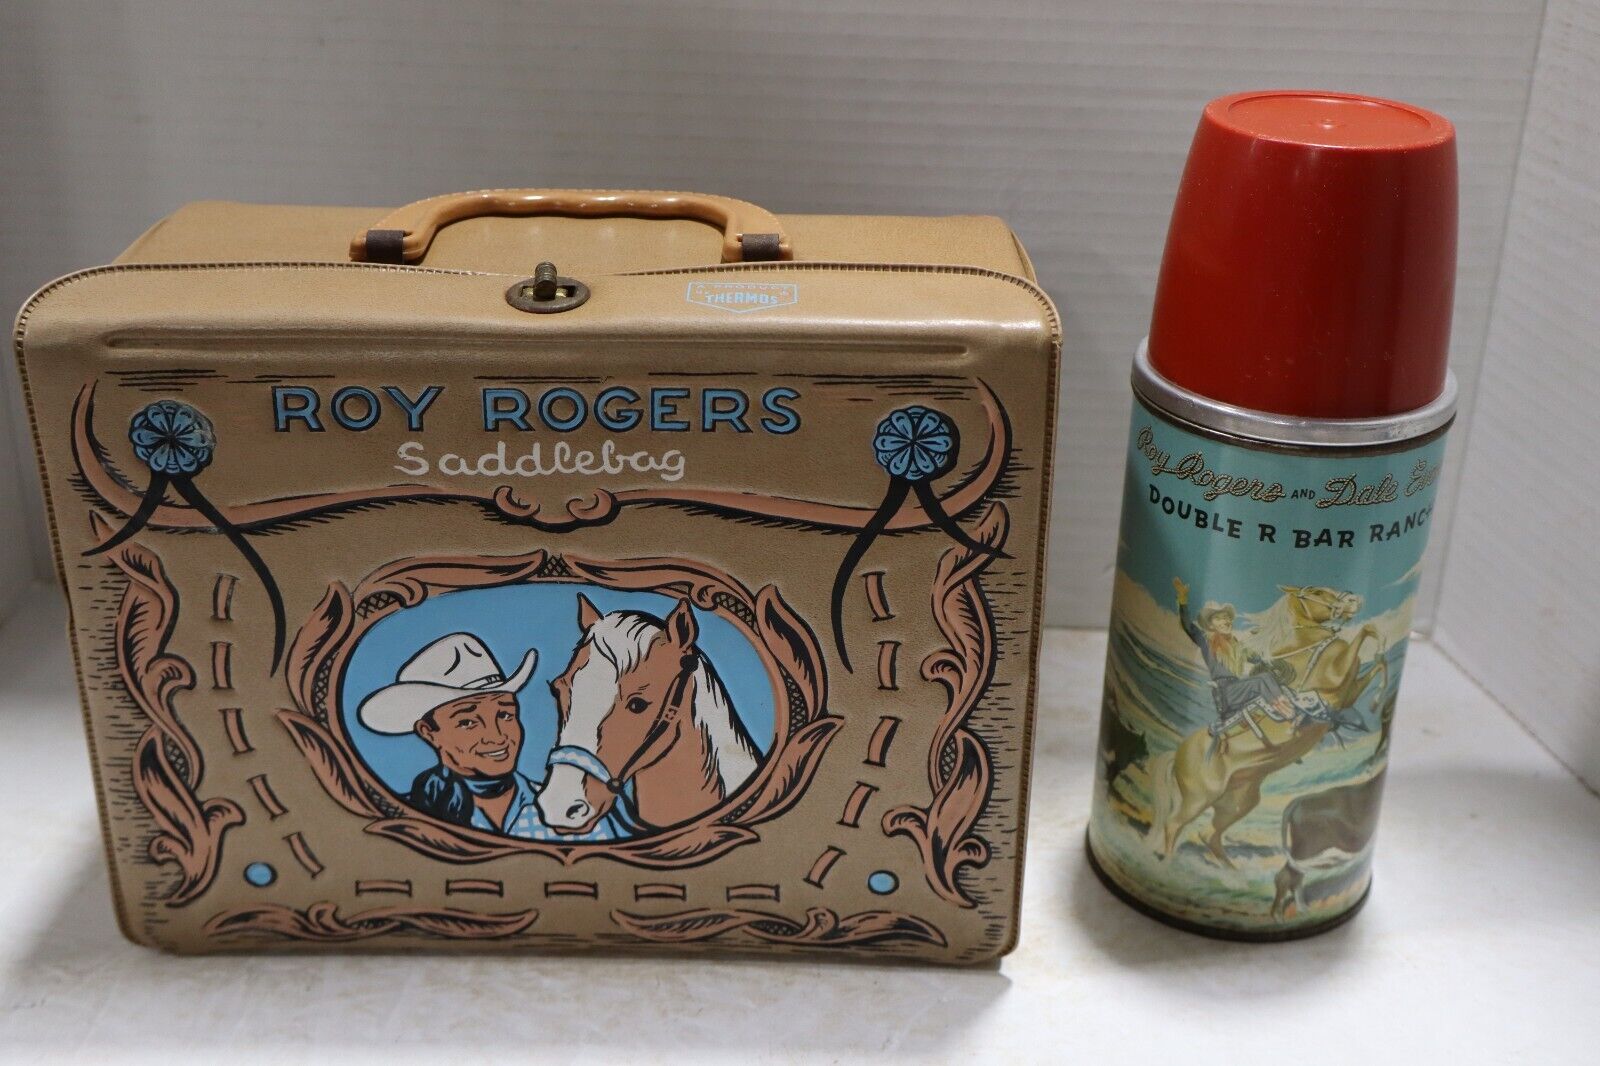 ROY ROGERS 1960 Brown Saddlebag Vinyl Lunchbox Thermos Double R Bar Ranch